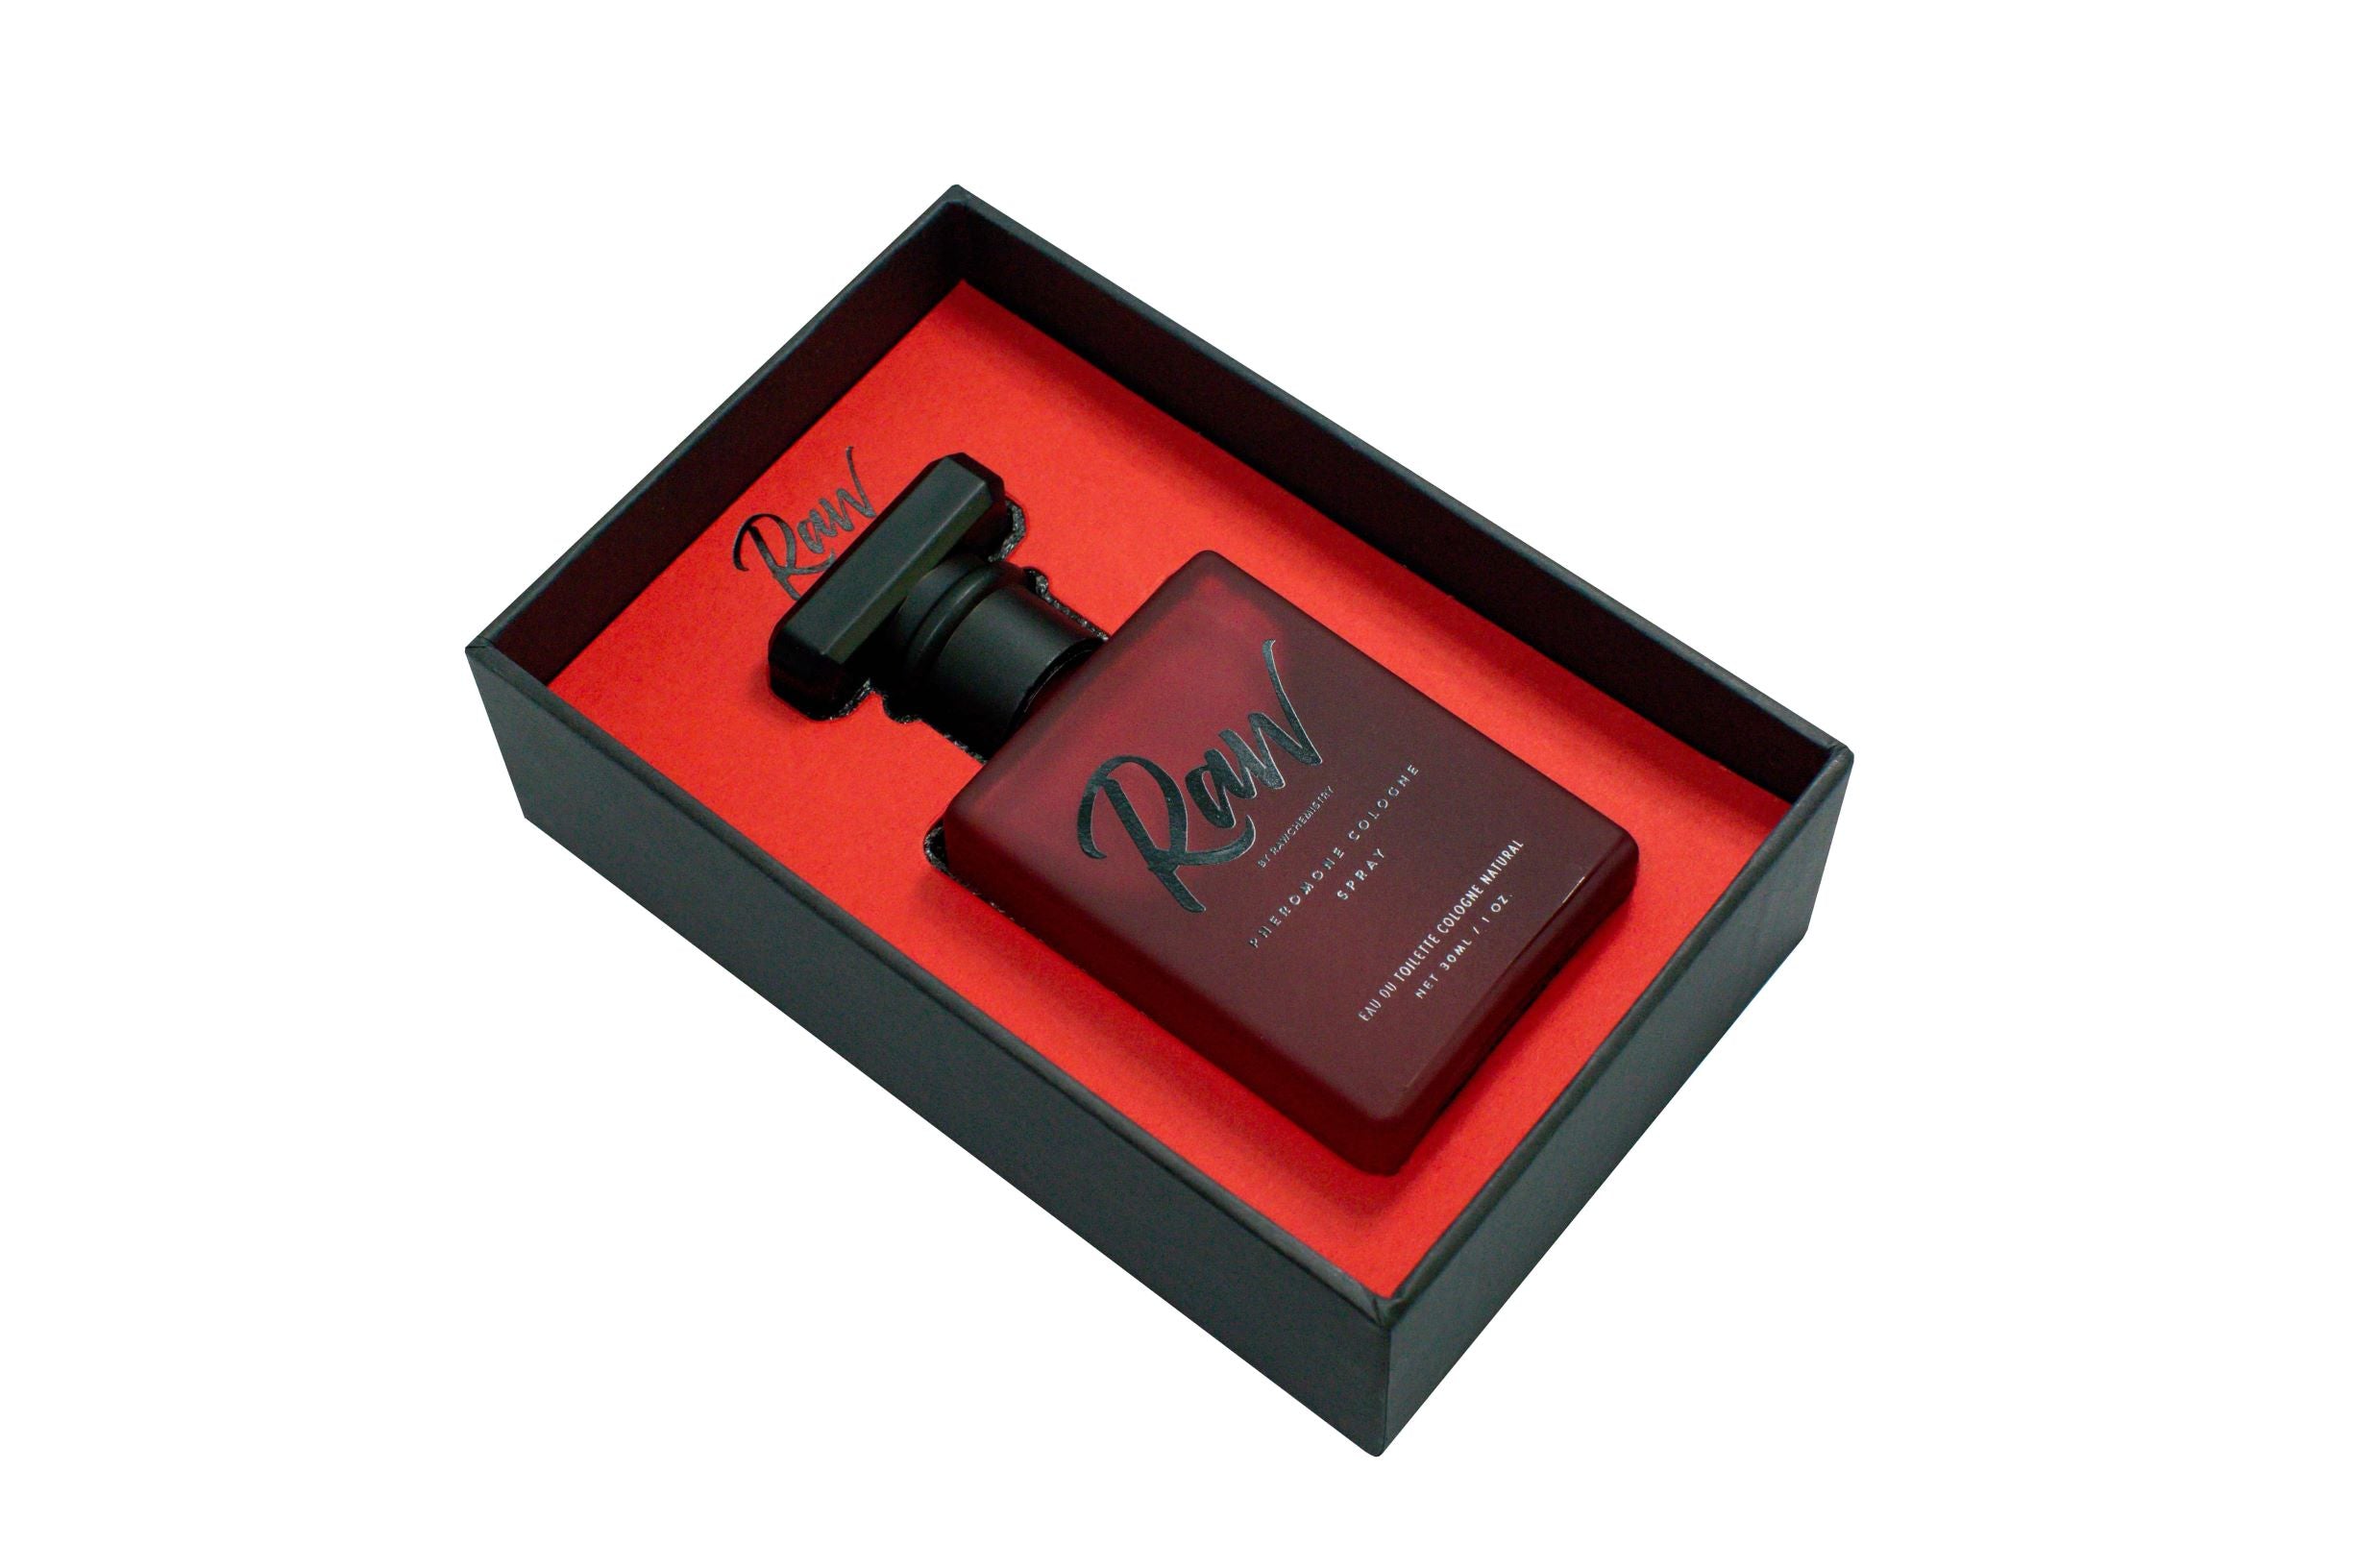 Raw by RawChemistry - A Pheromone Cologne for Men